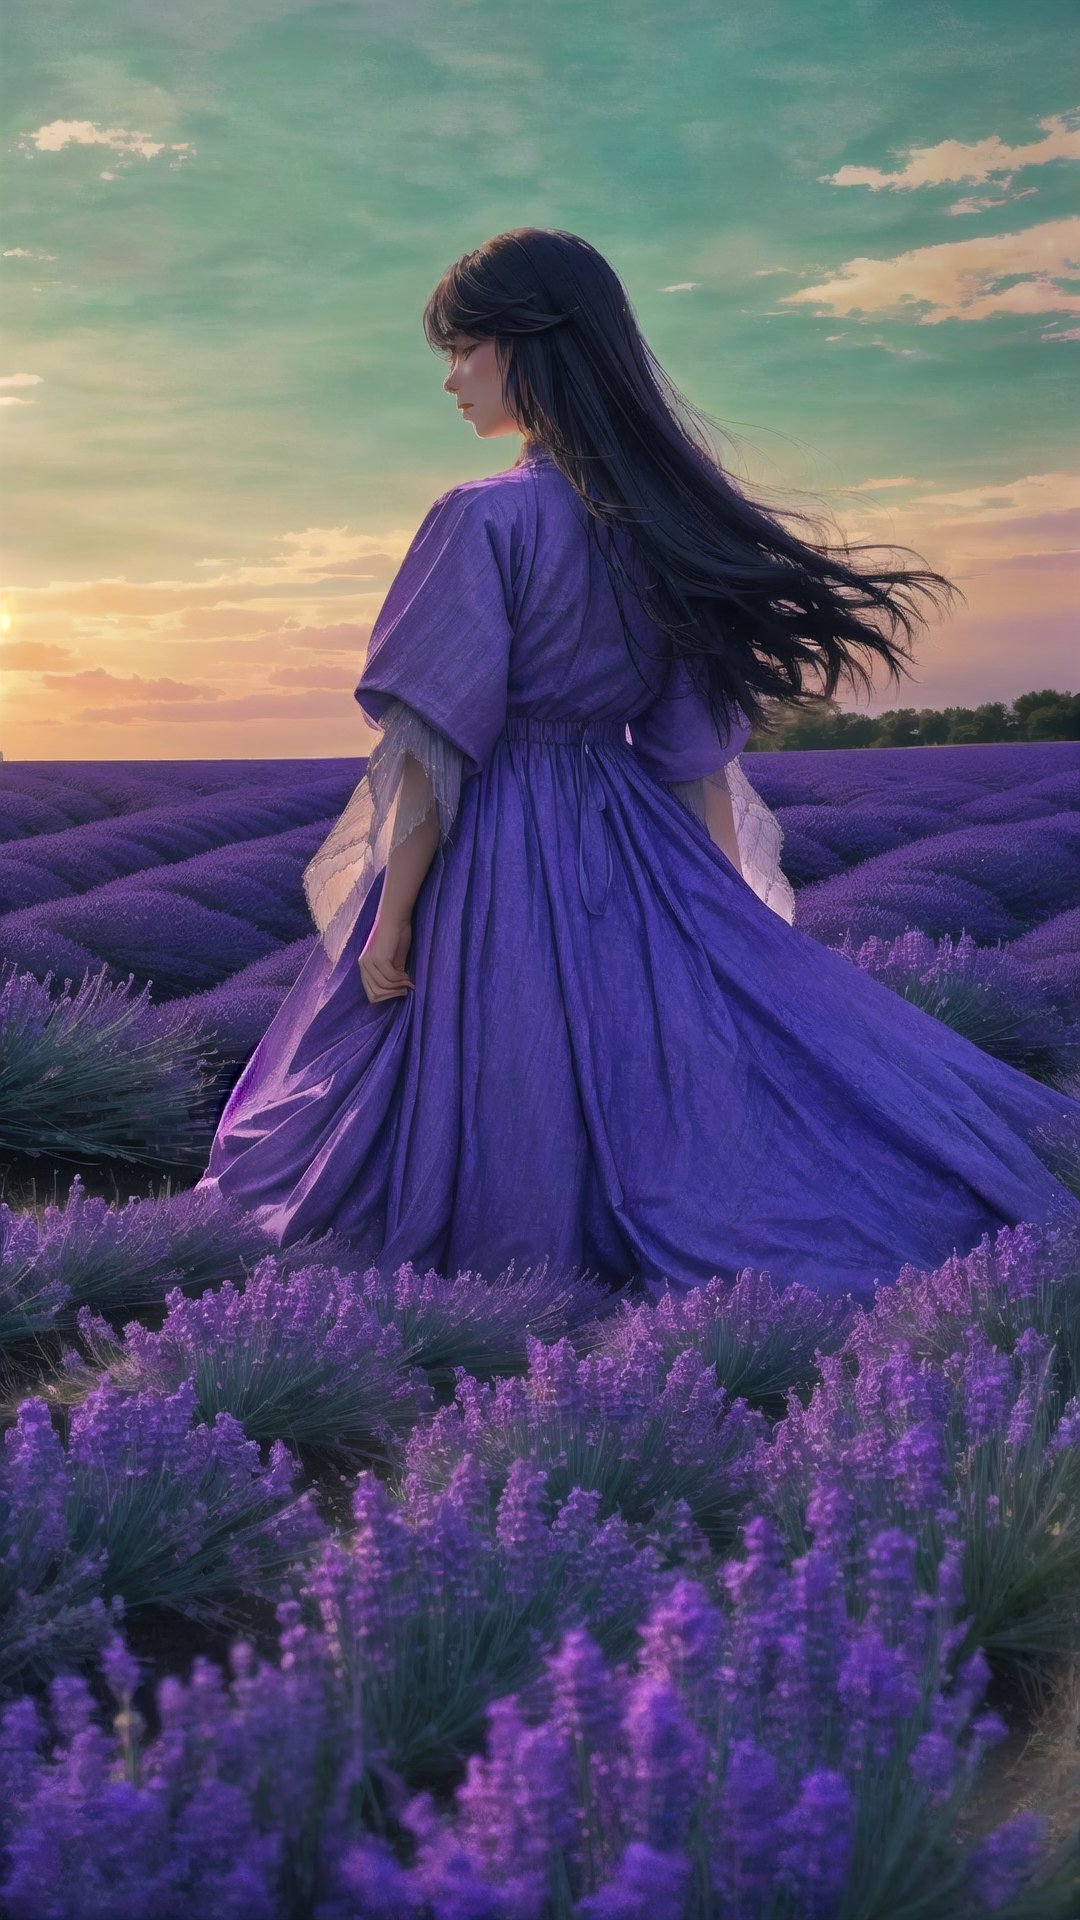  A lone figure stands amidst a lavender field, their presence stirring the fragrant mist. Dried lavender sprigs adorn their hair, weaving tales of forgotten memories and whispered dreams. Eerie, evocative, high resolution.